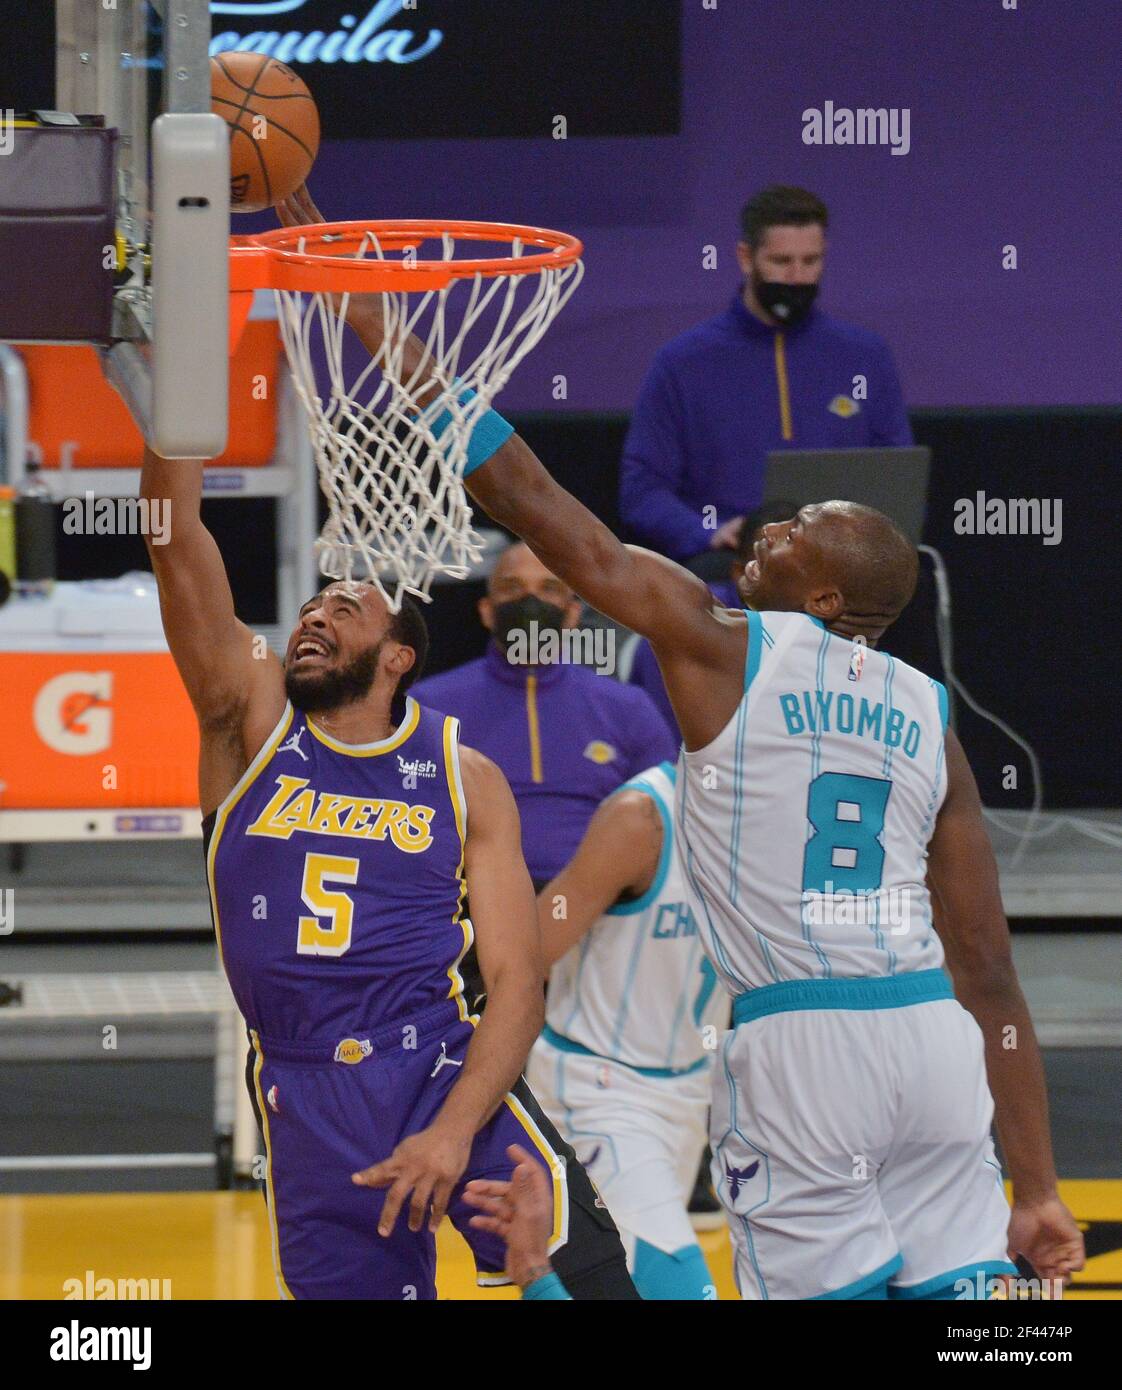 Los Angeles, United States. 18th Mar, 2021. Los Angeles Lakers' guard Talen Horton-Tucker scores on Charlotte Hornets' guard Malik Monk during the first half at Staples Center in Los Angeles on Thursday, March 18, 2021. The Lakers defeated the Hornets 116-105. Photo by Jim Ruymen/UPI Credit: UPI/Alamy Live News Credit: UPI/Alamy Live News Stock Photo